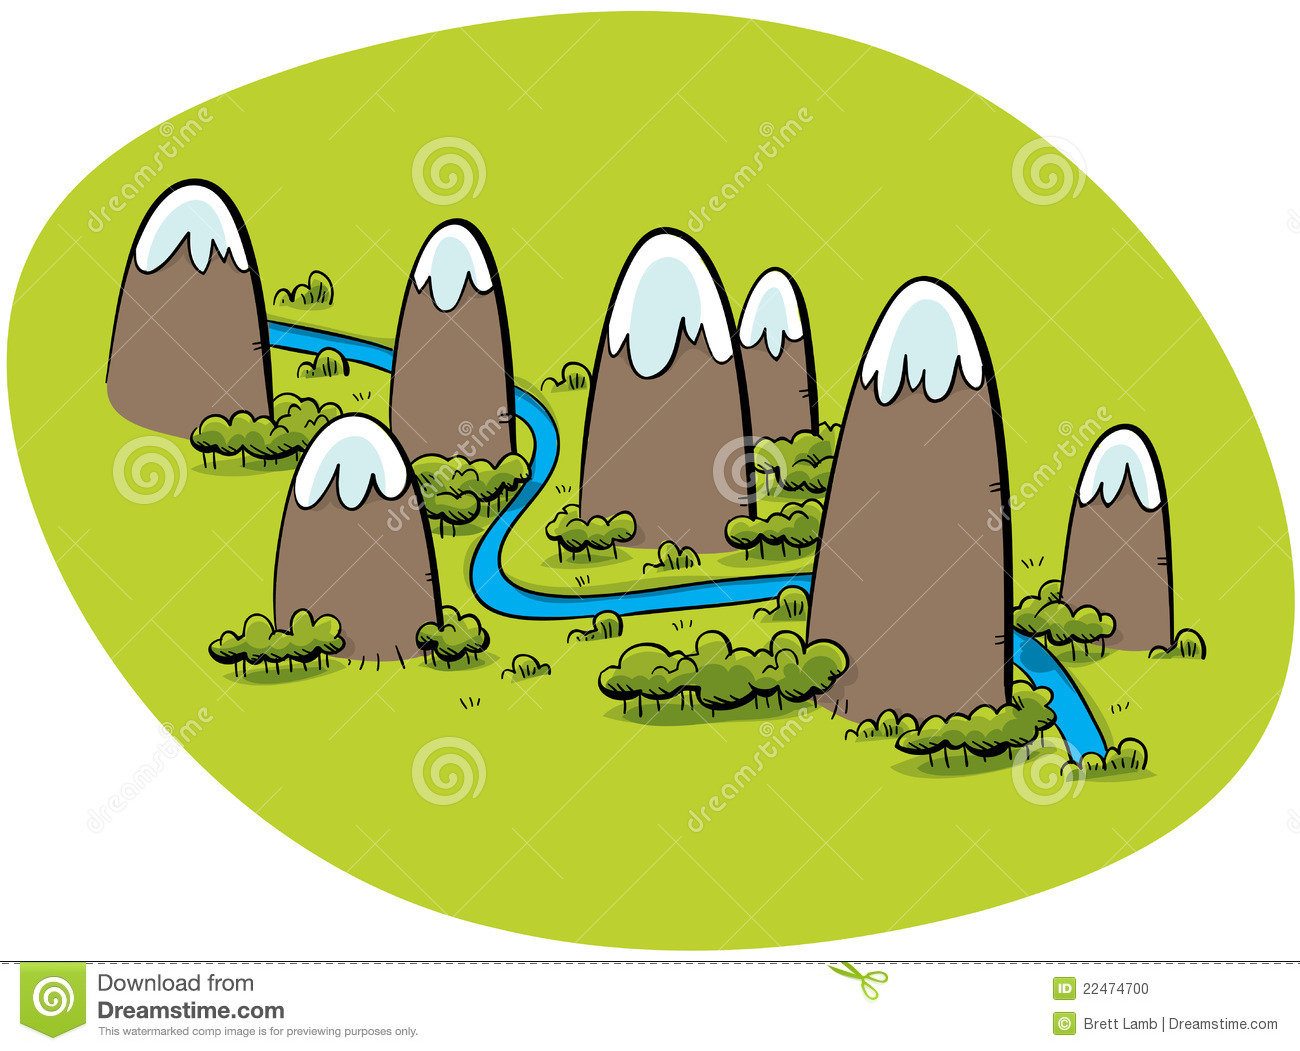 Rivers And Mountains Clipart